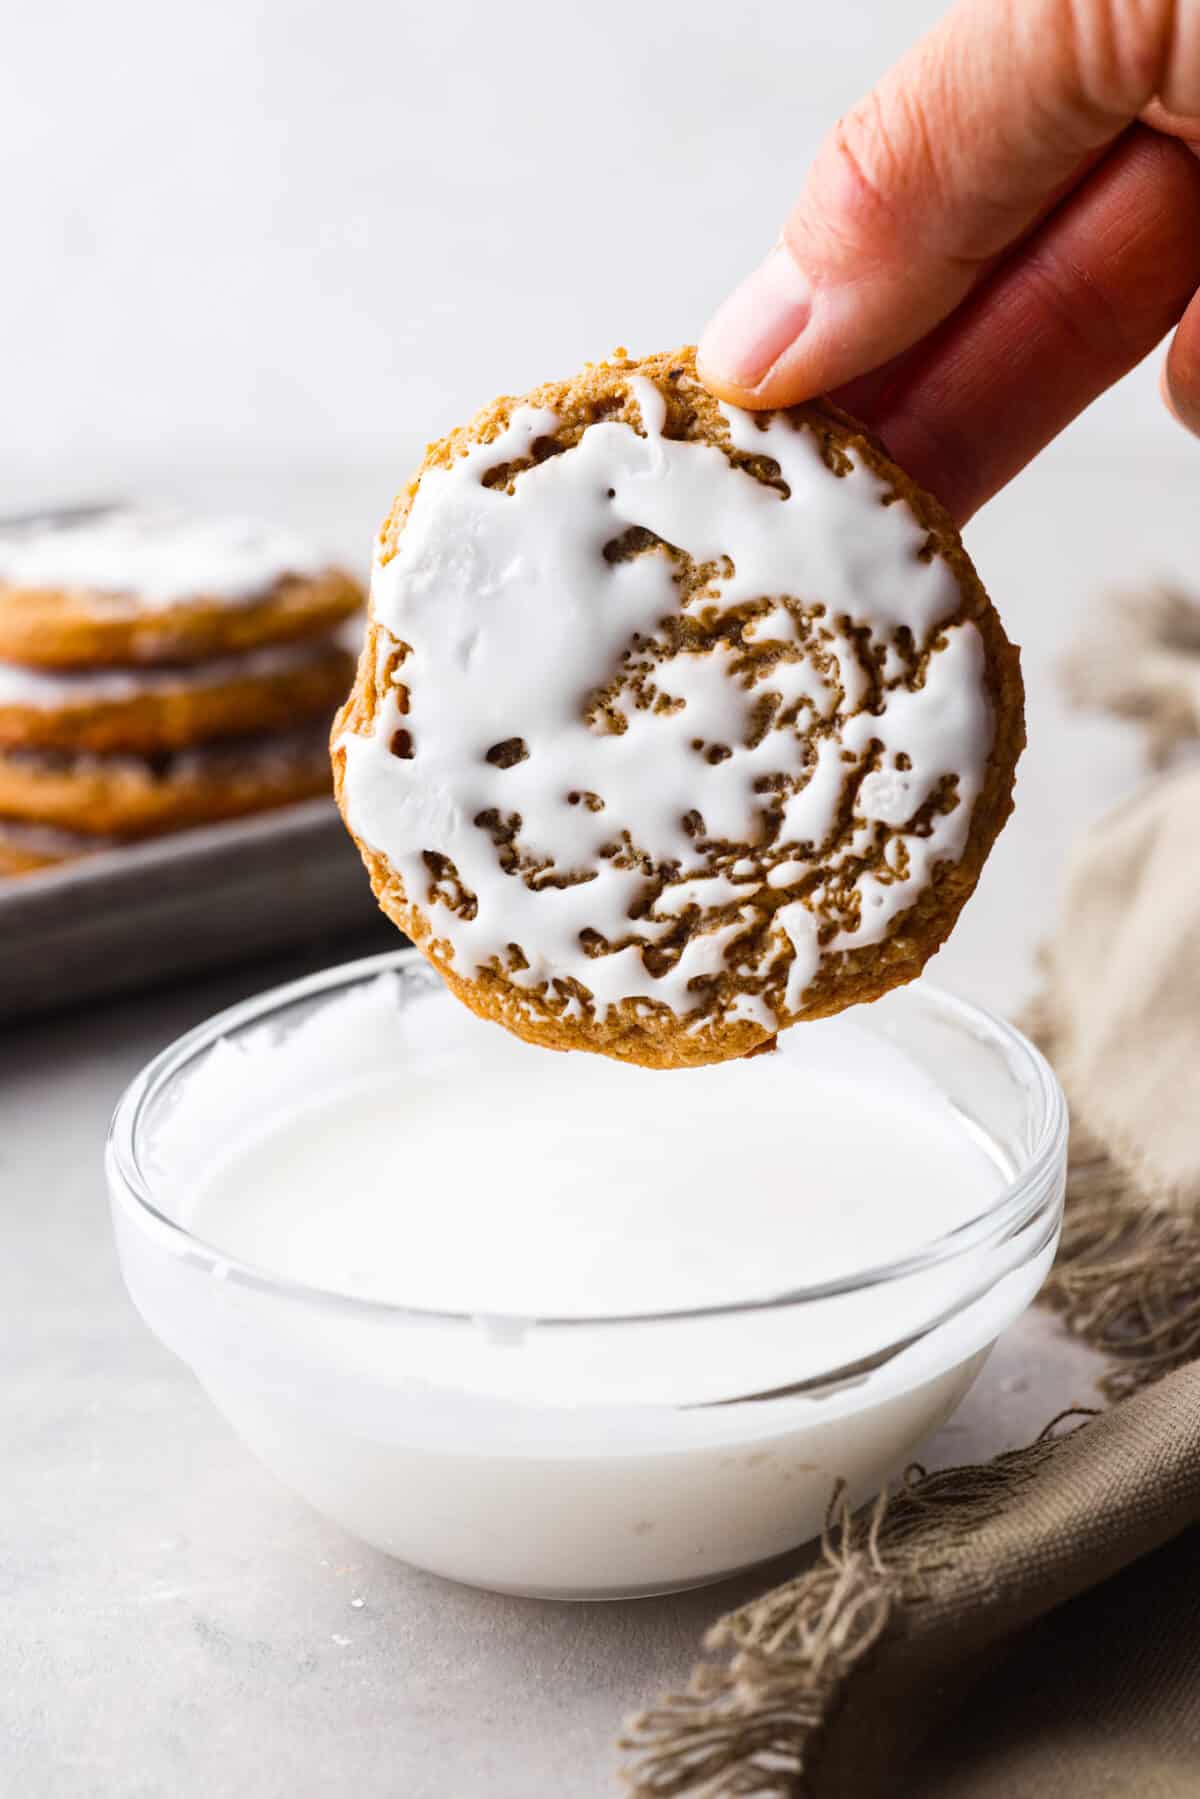 An iced oatmeal cookie, after being dipped in the glaze.